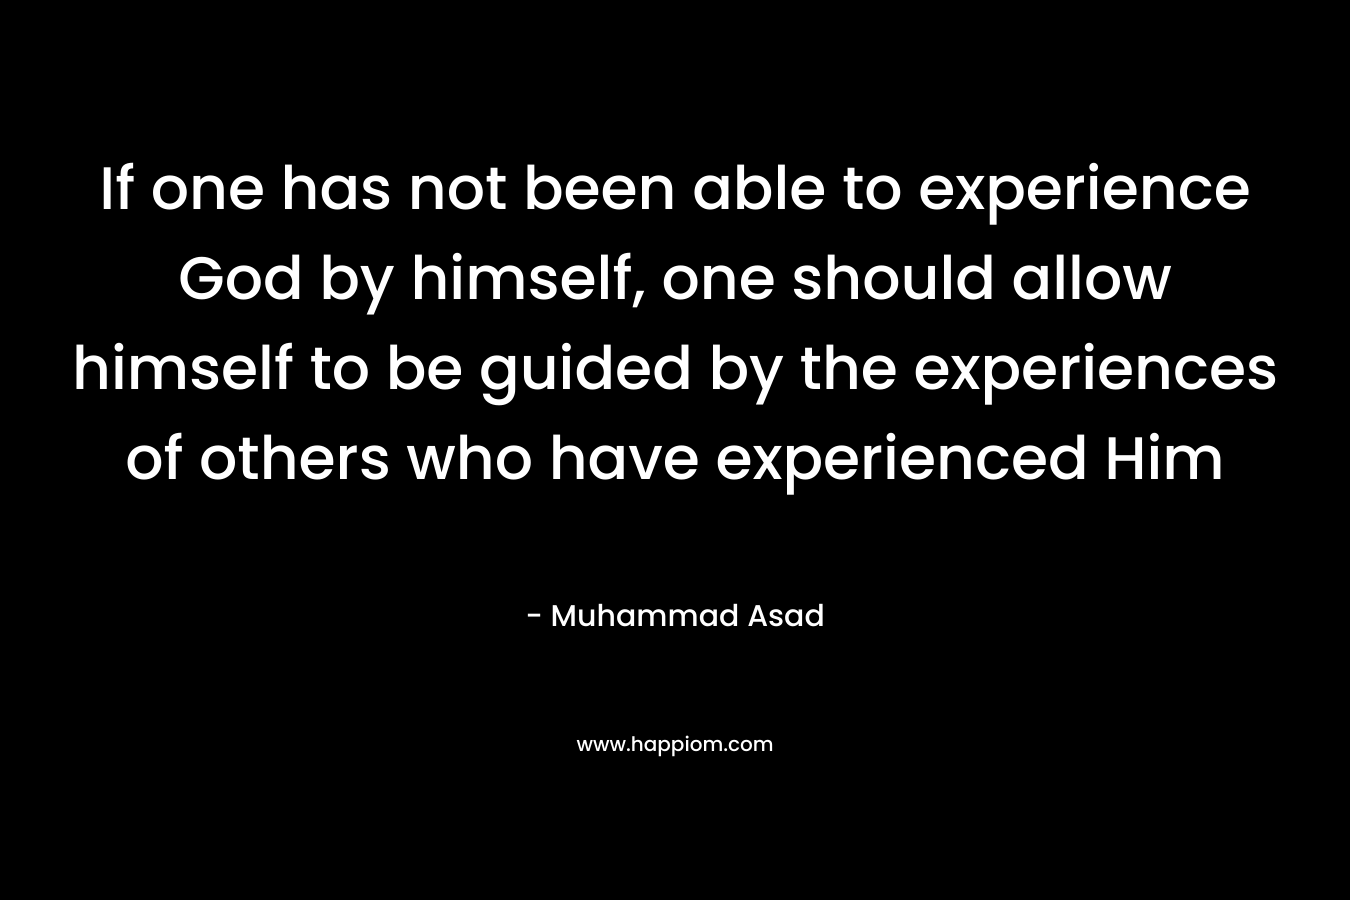 If one has not been able to experience God by himself, one should allow himself to be guided by the experiences of others who have experienced Him